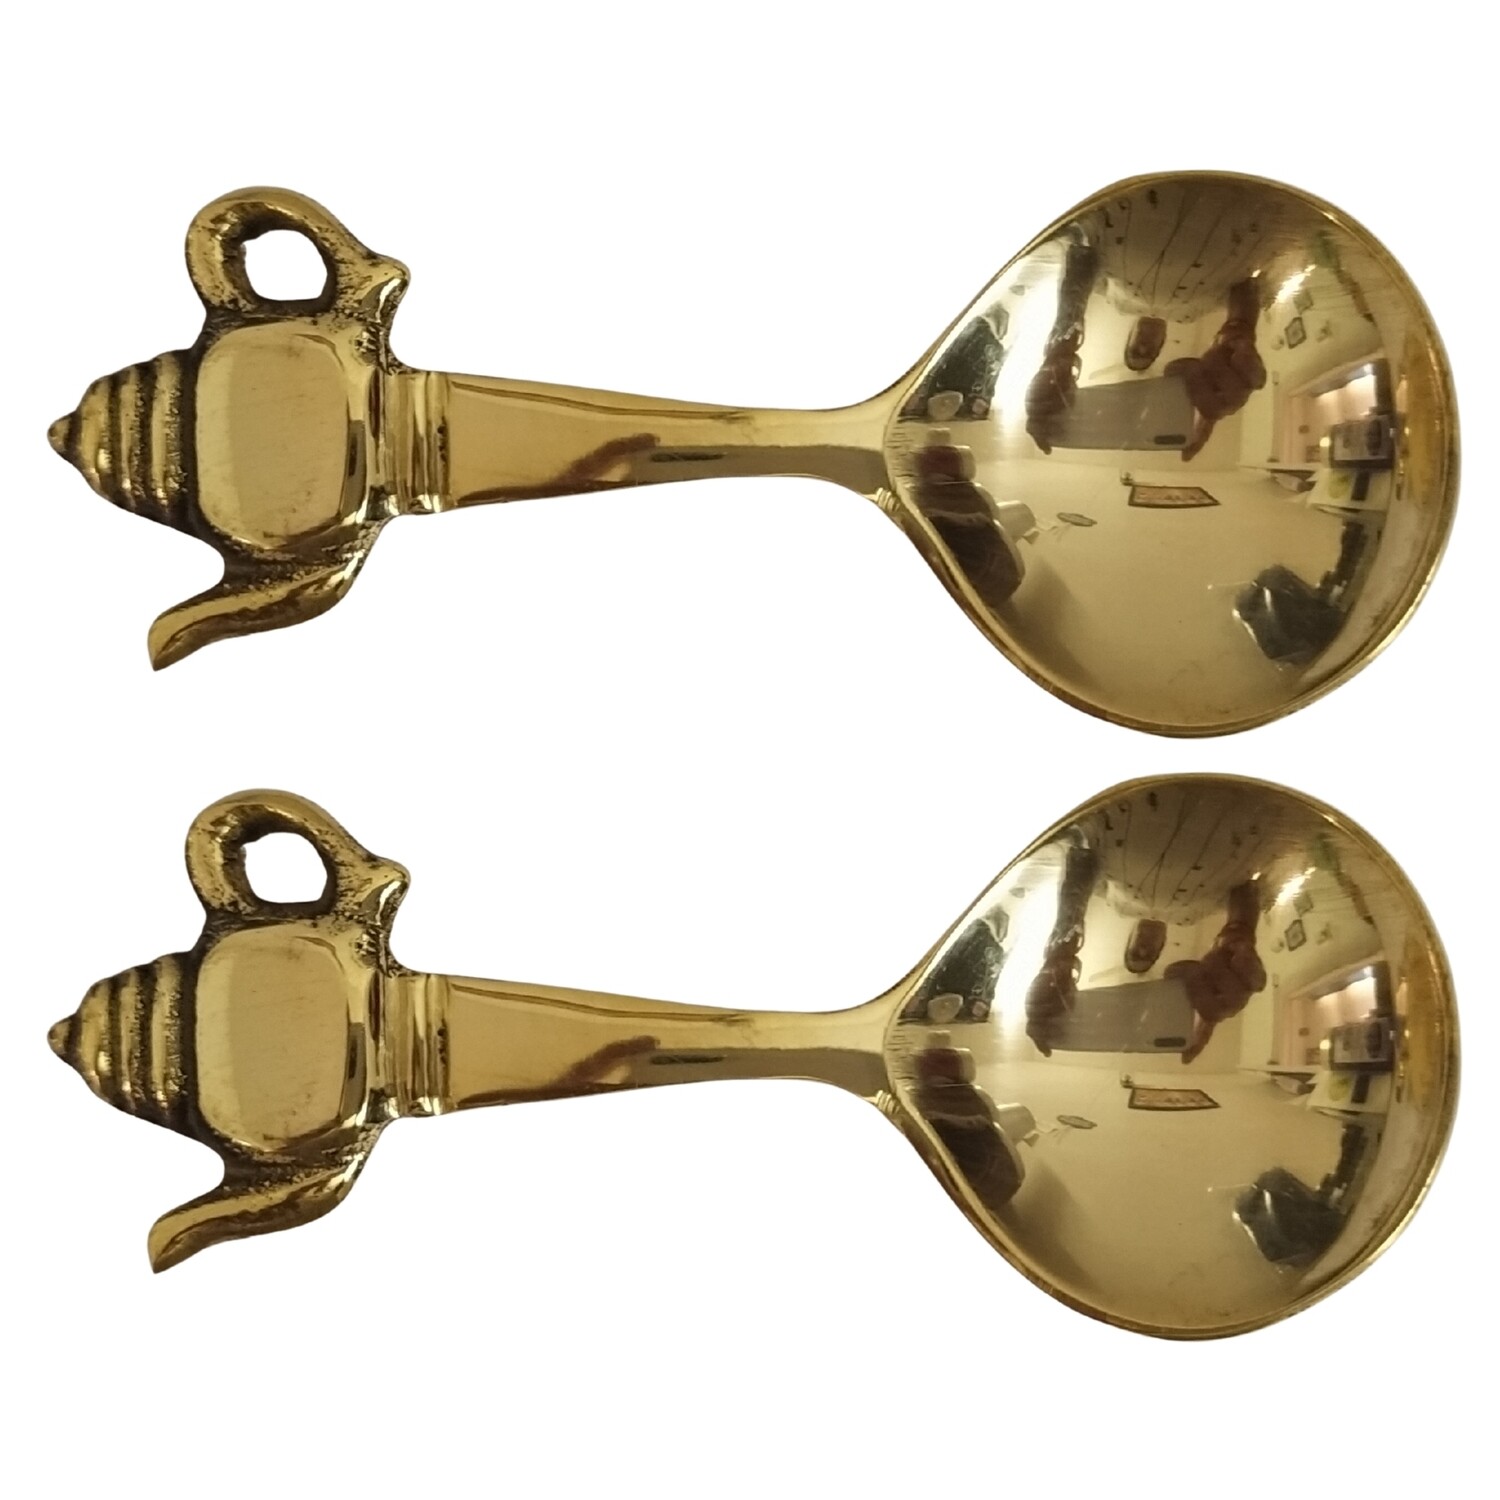 Spoon 2 Pieces Brass Metal with Kettle shaped Handle